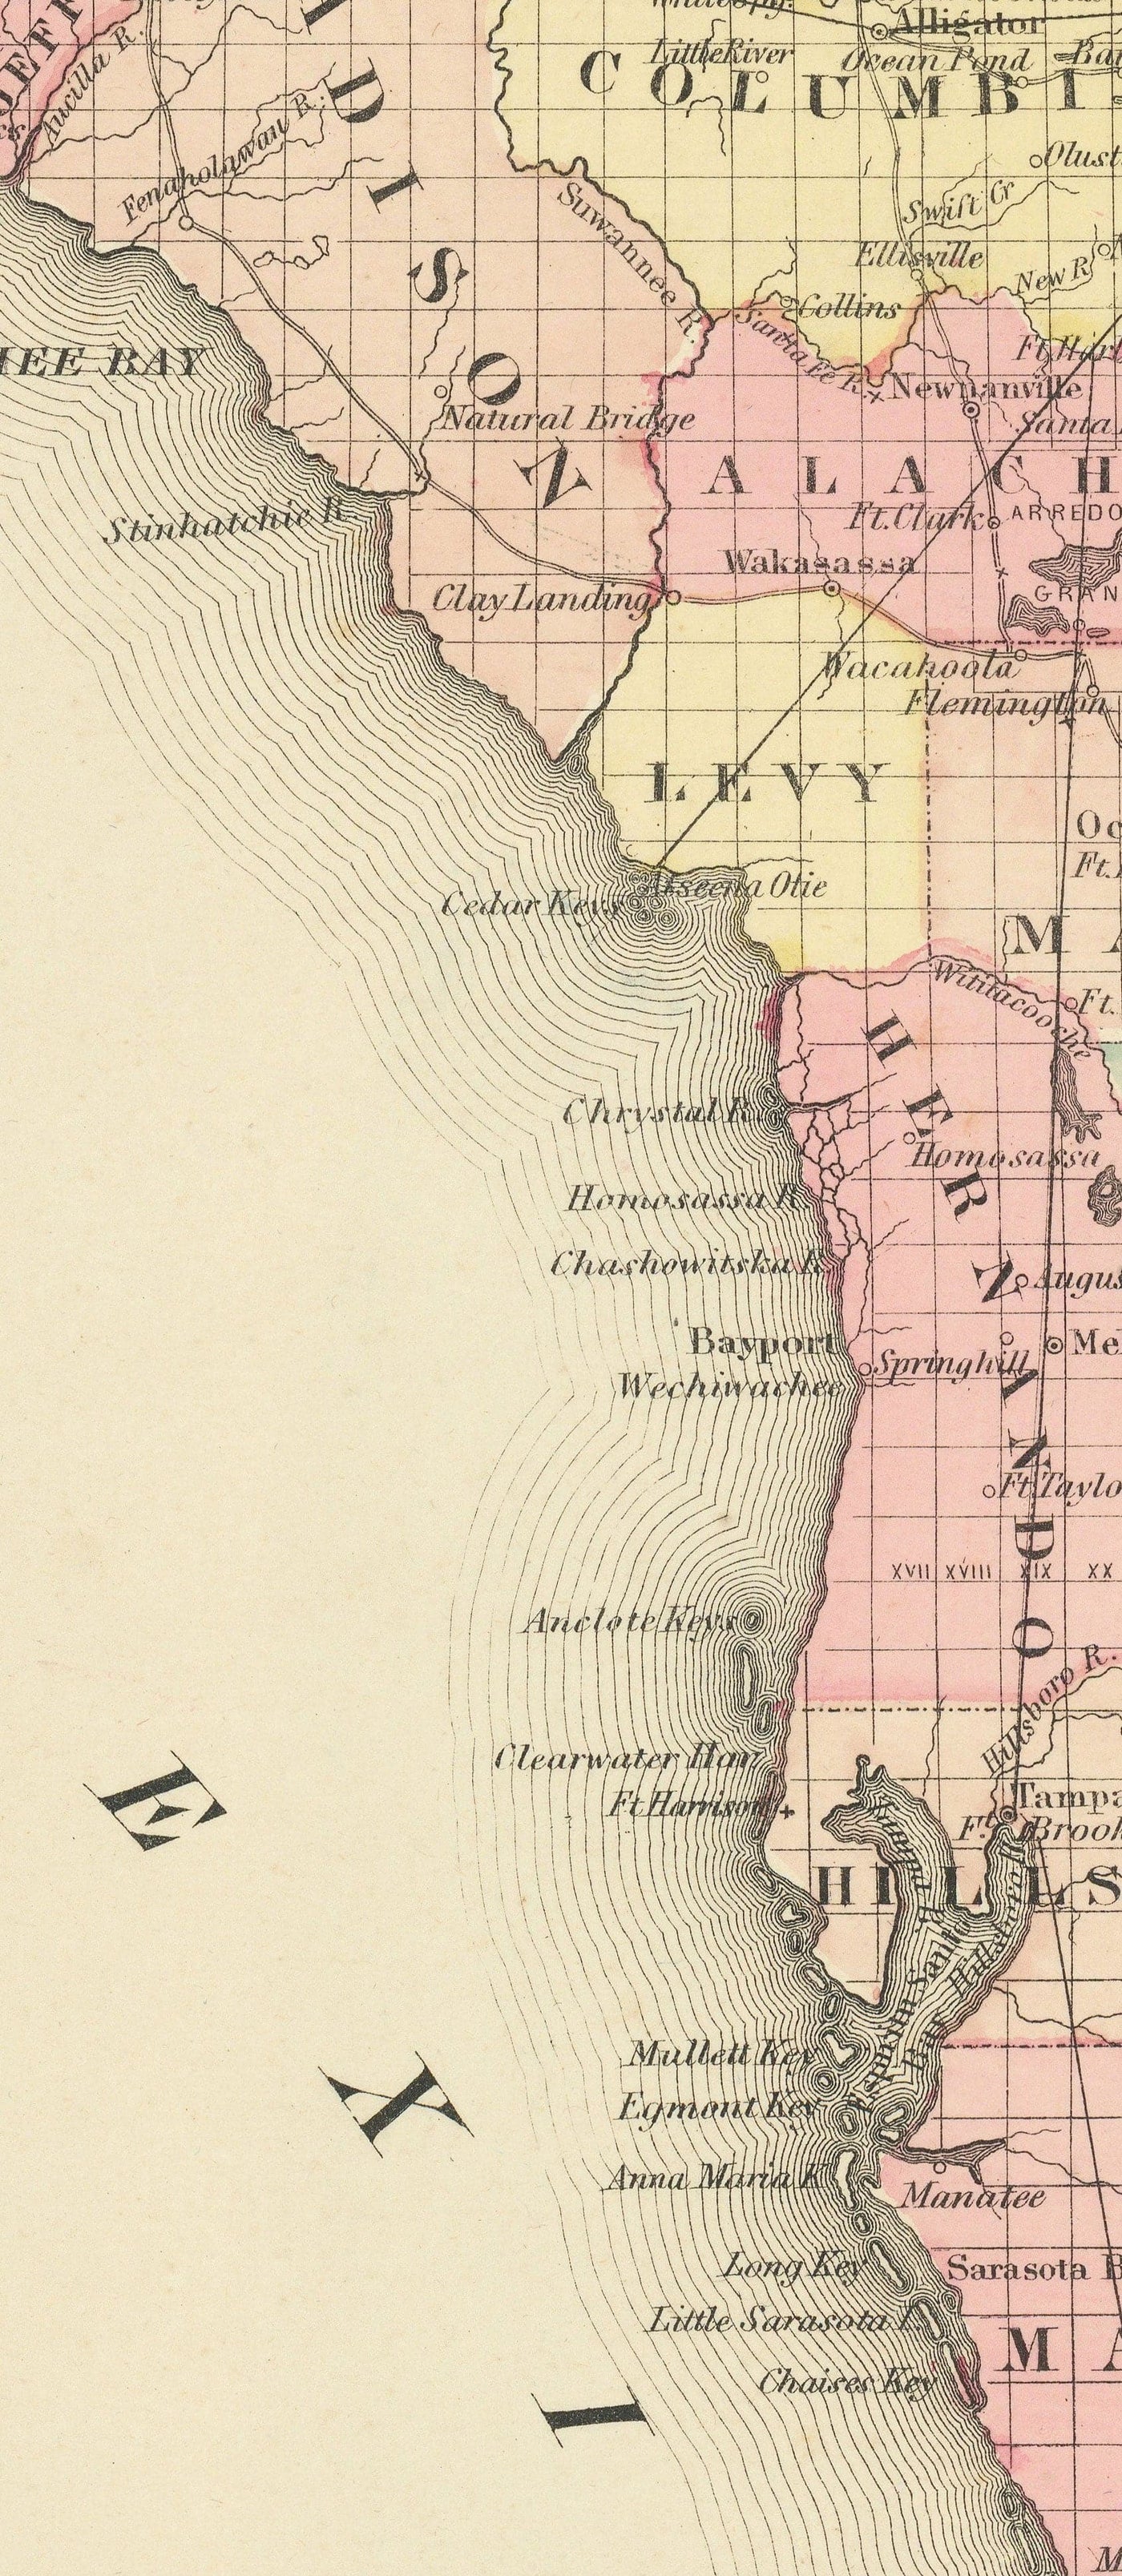 Old Map of Florida in 1855 by Colton - Keys, Panhandle, Jacksonville, Tampa, Dade, Tallahassee, Ft Lauderdale